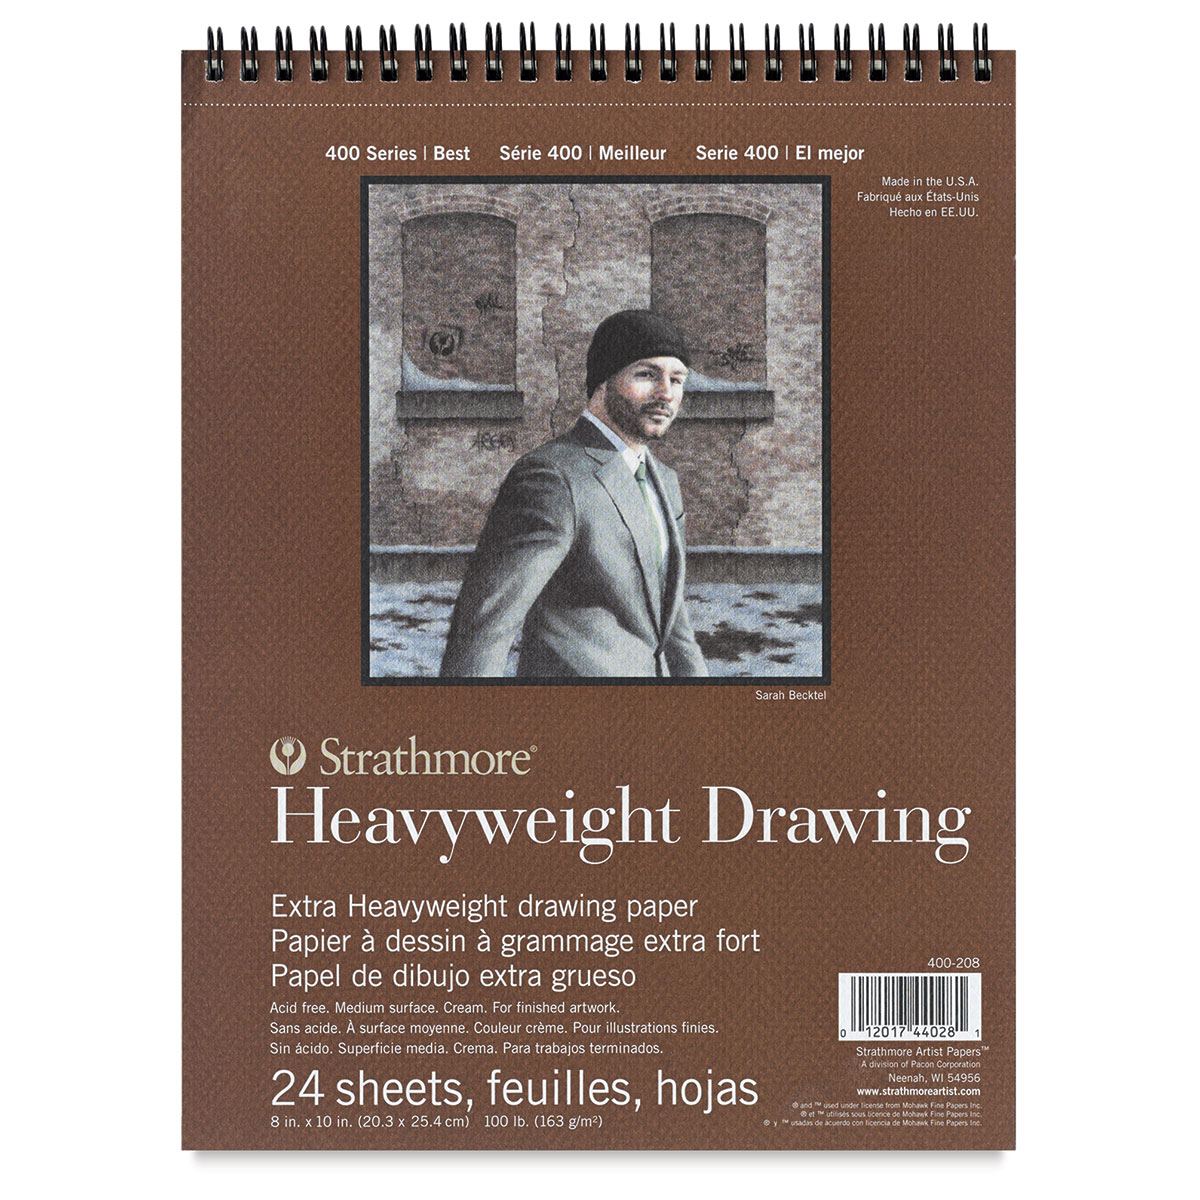 Strathmore 400 Series Heavyweight Drawing Pads